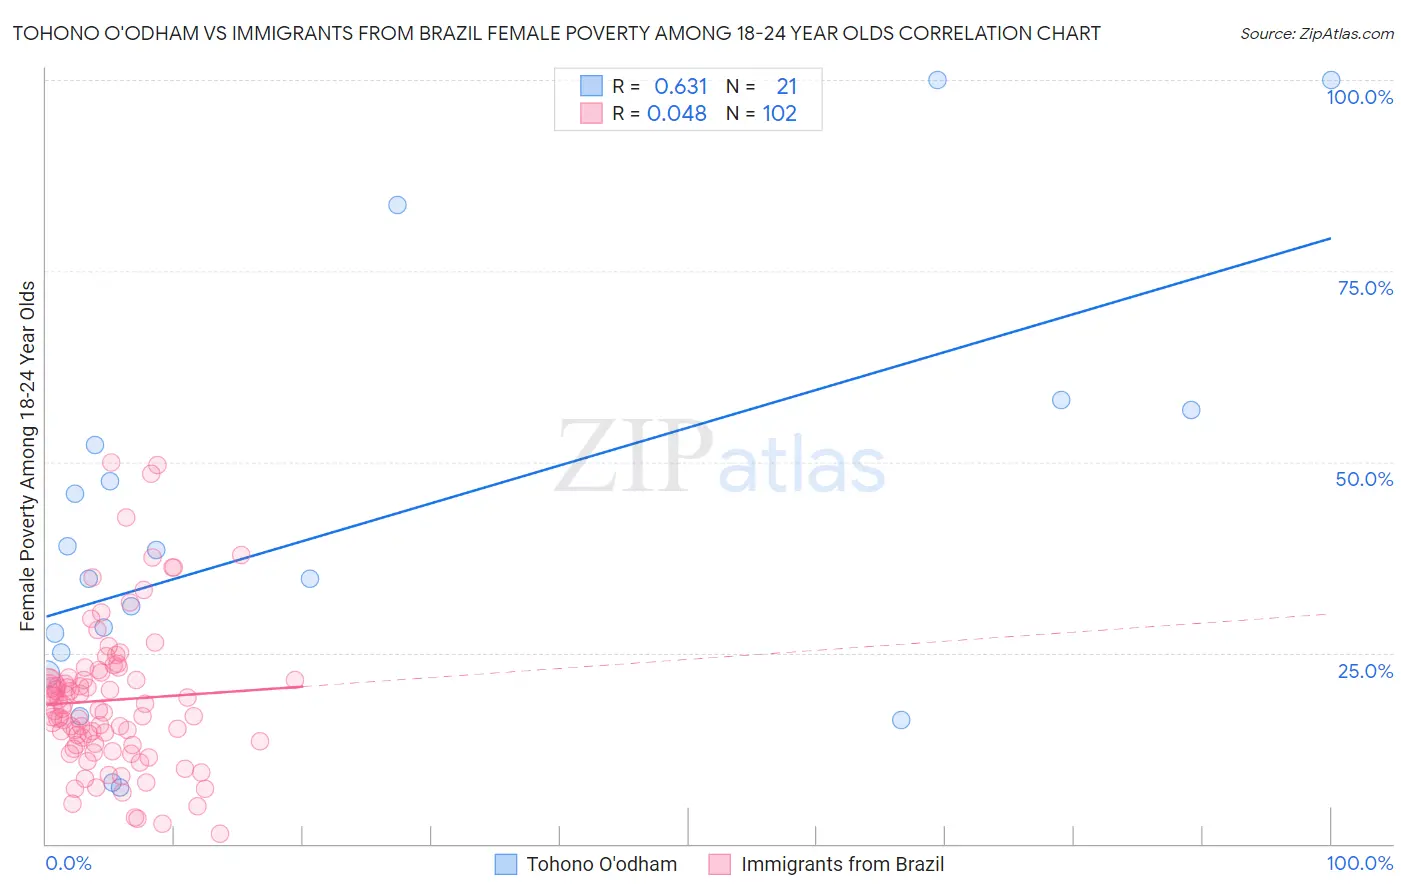 Tohono O'odham vs Immigrants from Brazil Female Poverty Among 18-24 Year Olds